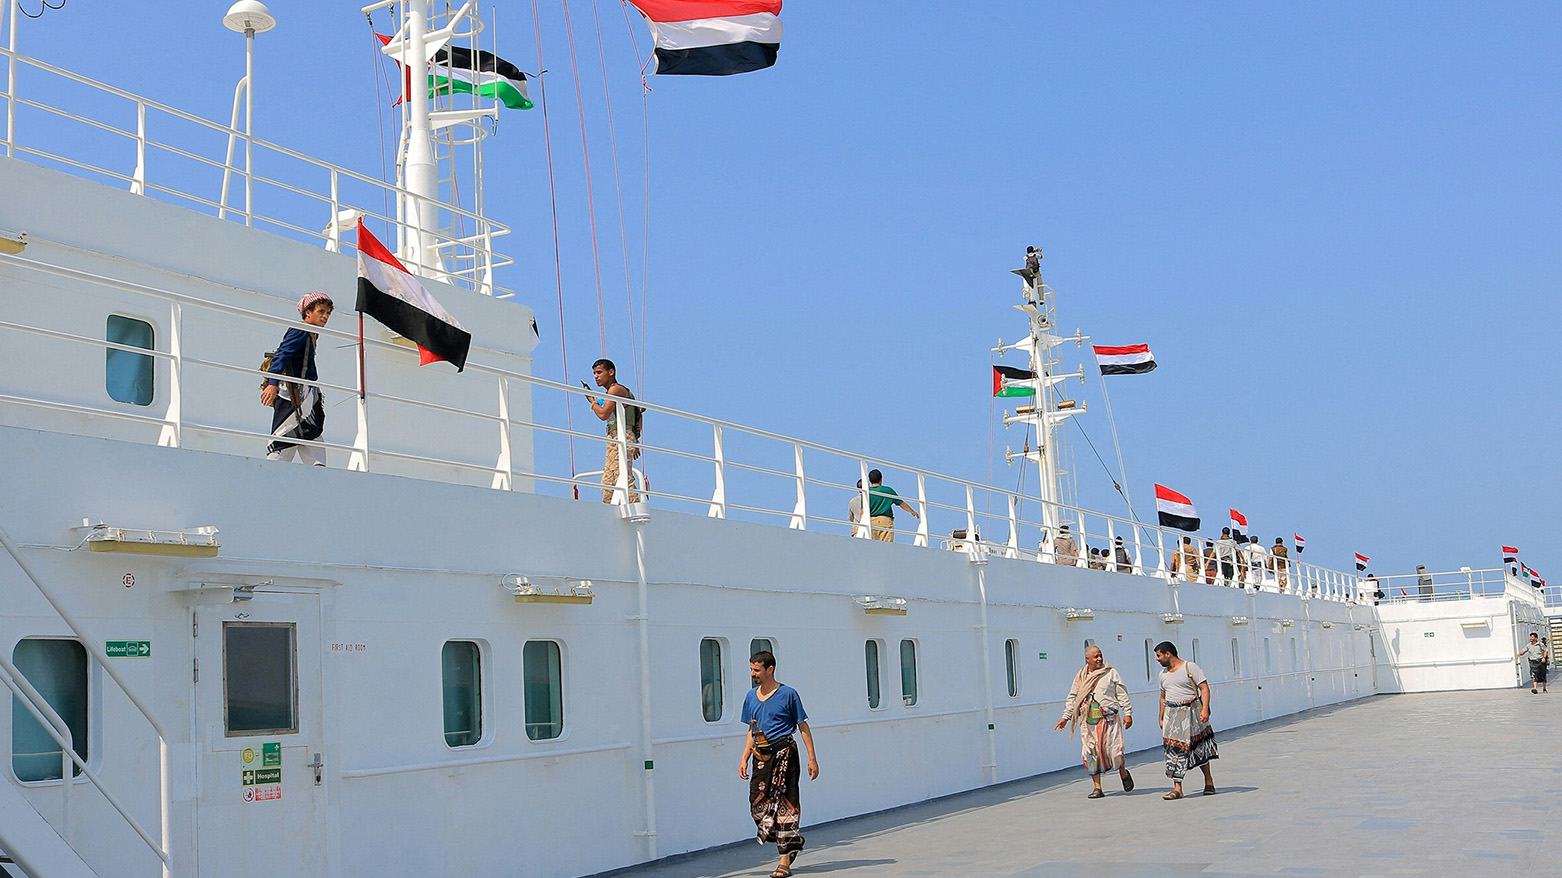 The Galaxy Leader cargo ship, seized by Huthi fighters two days earlier, docked in a port on the Red Sea in the Yemeni province of Hodeida, with Palestinian and Yemeni flags installed on it, Nov. 22, 2023 (Photo: AFP)